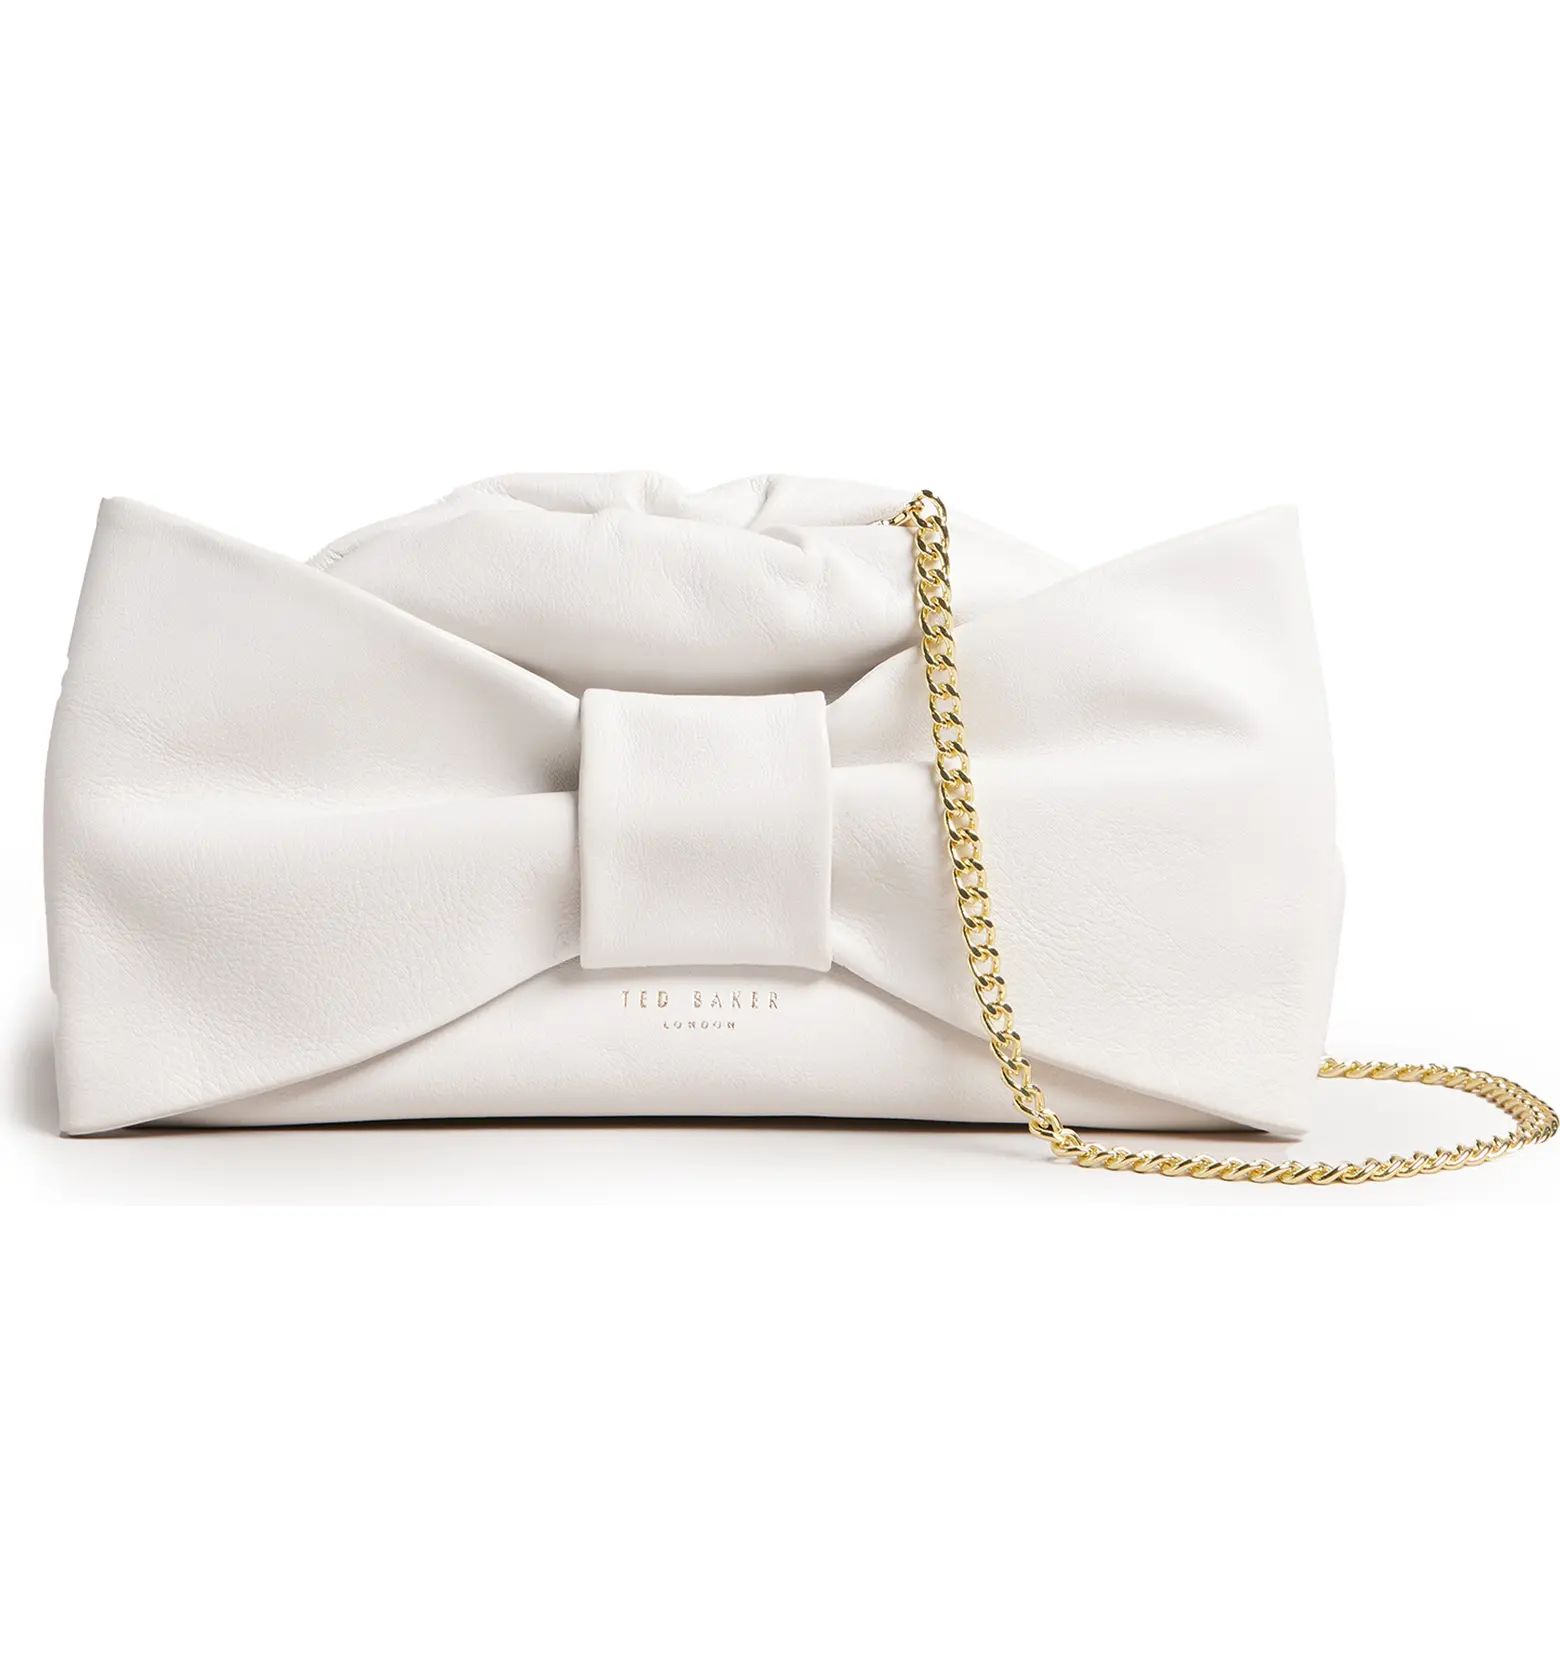 Ted Baker London Niasa Knot Bow Clutch | Nordstrom | Nordstrom